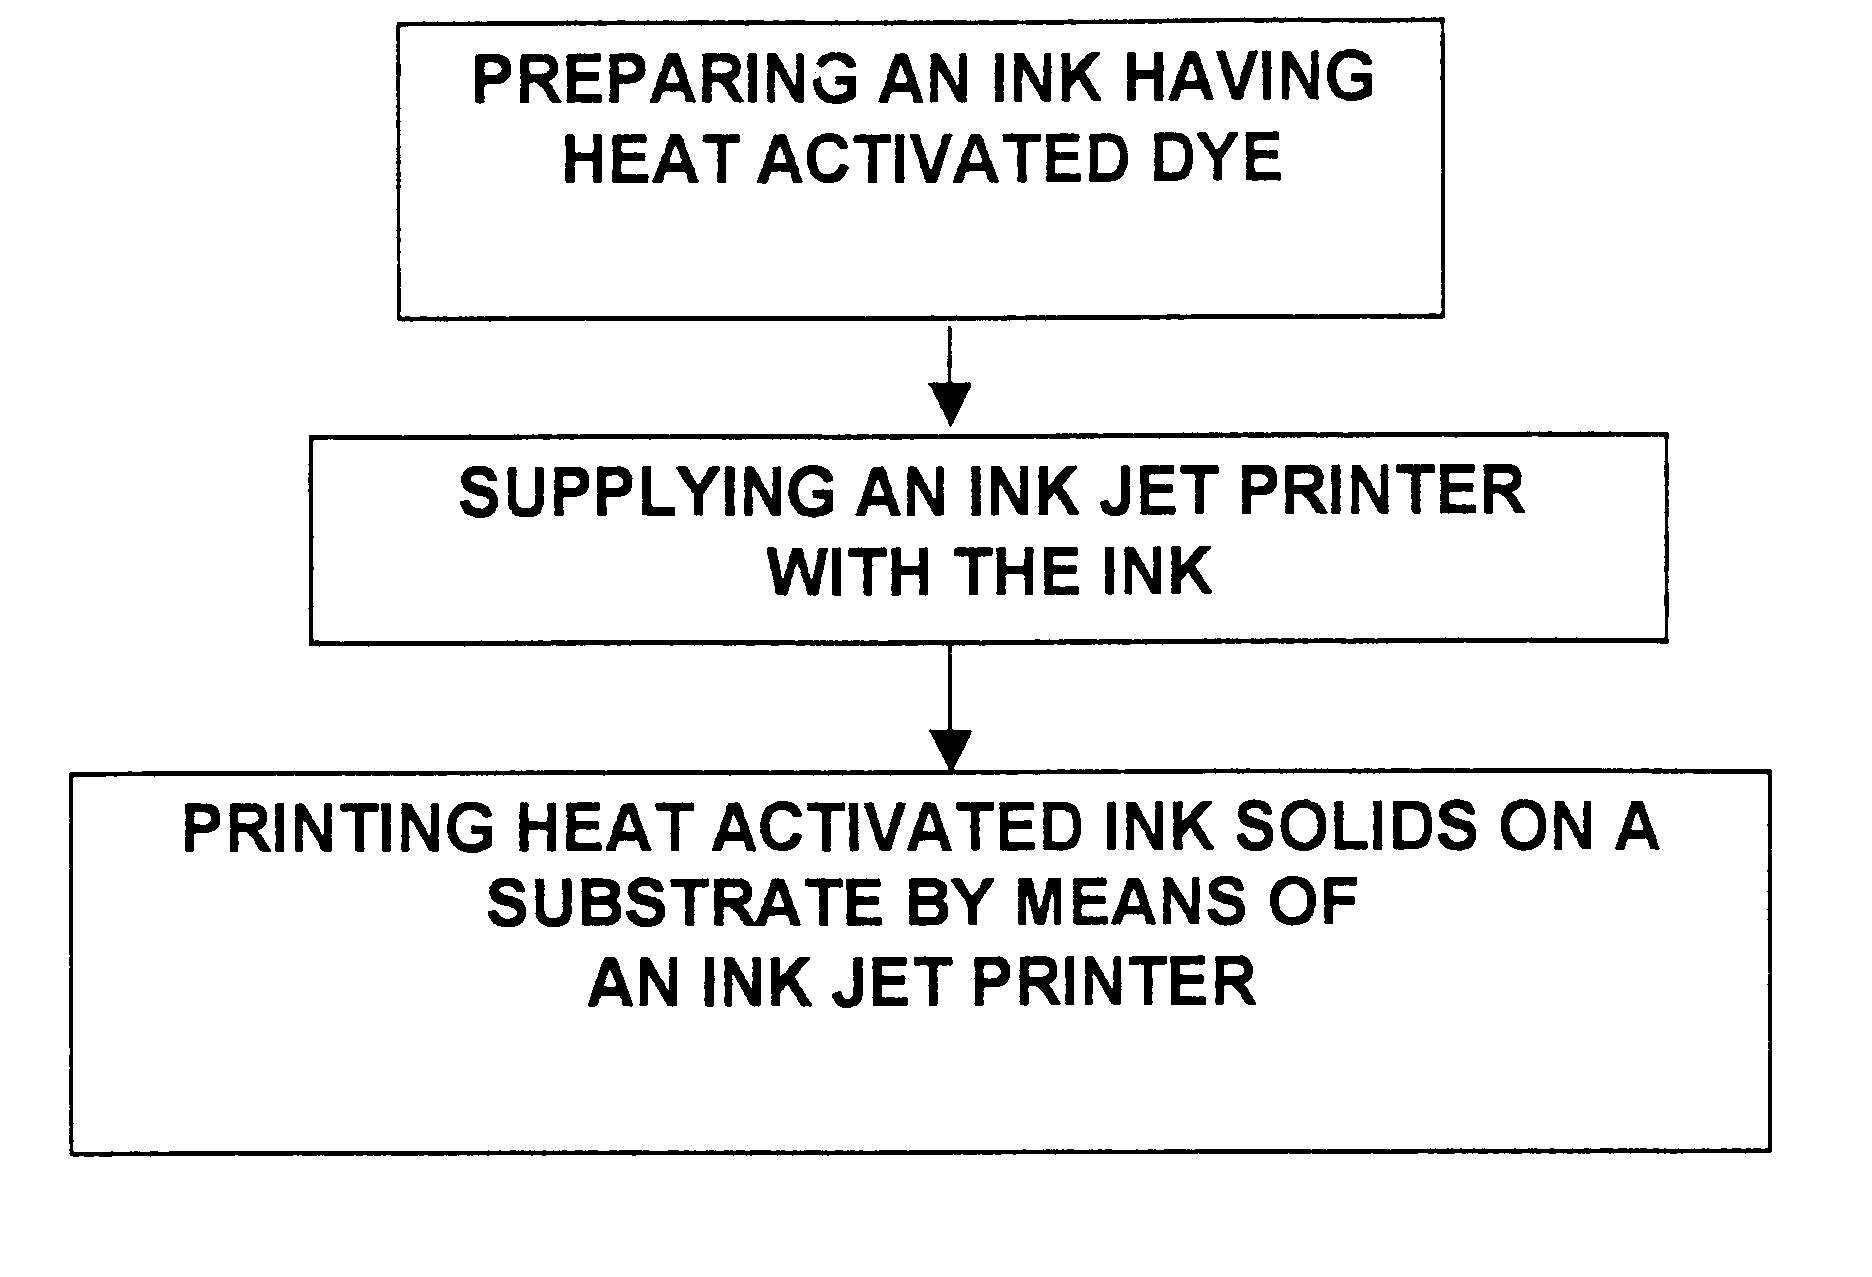 Printed media produced by permanent heat activated printing process